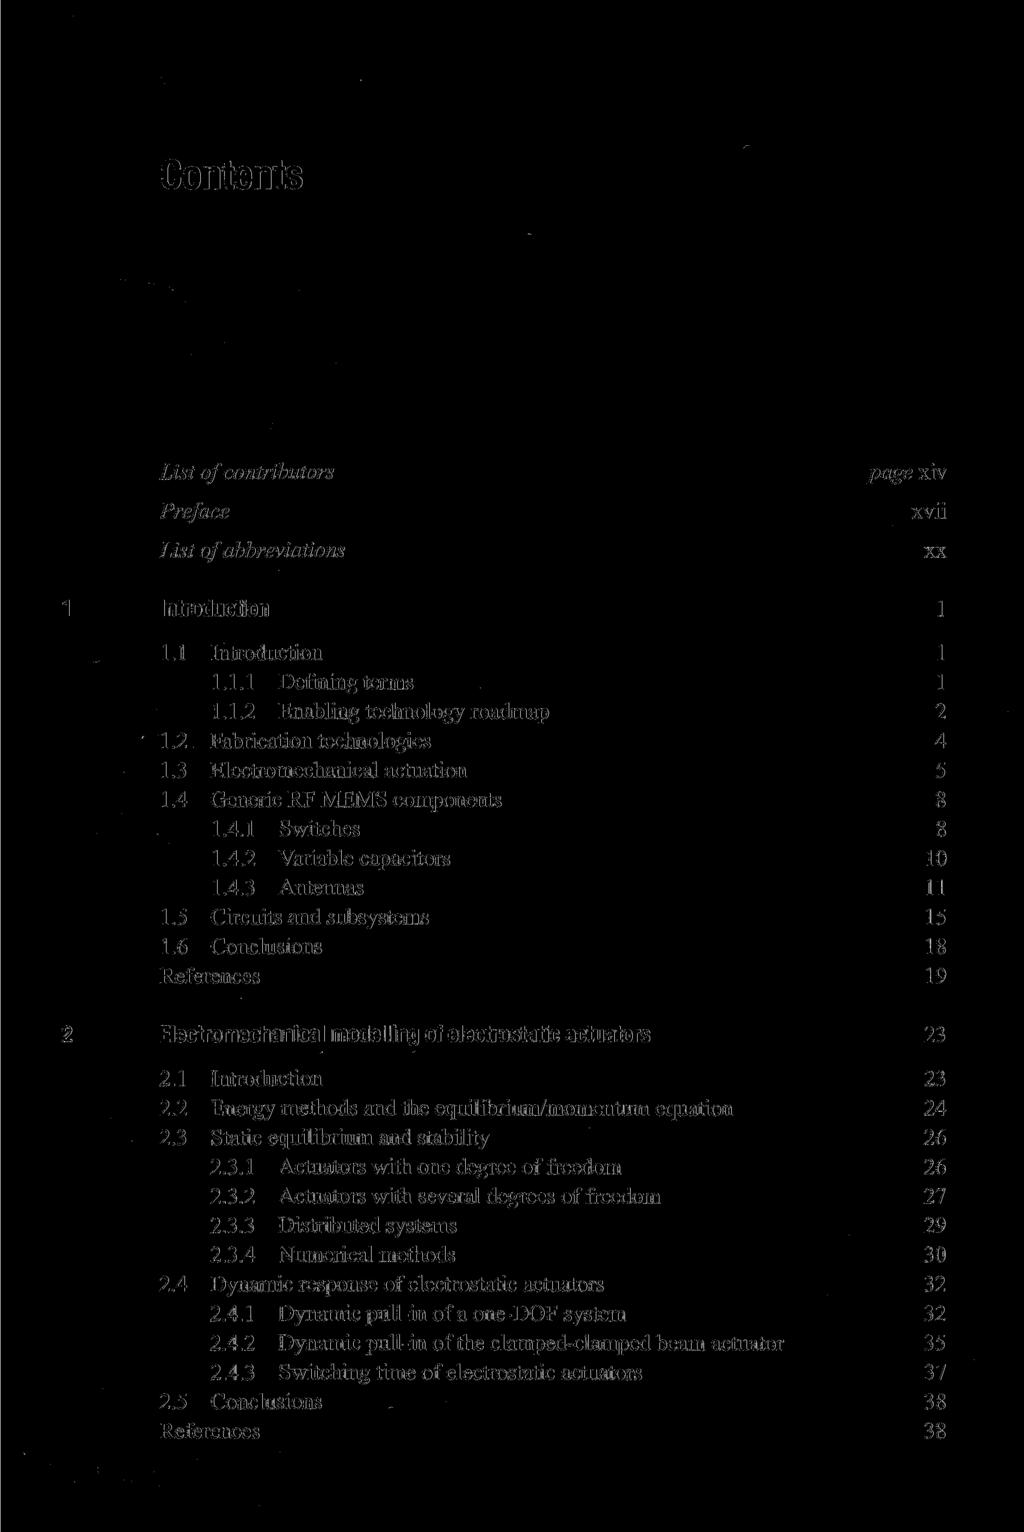 Contents List of contributors Preface List of abbreviations page xiv xvii xx Introduction 1 1.1 Introduction 1 1.1.1 Defining terms 1 1.1.2 Enabling technology roadmap 2 1.